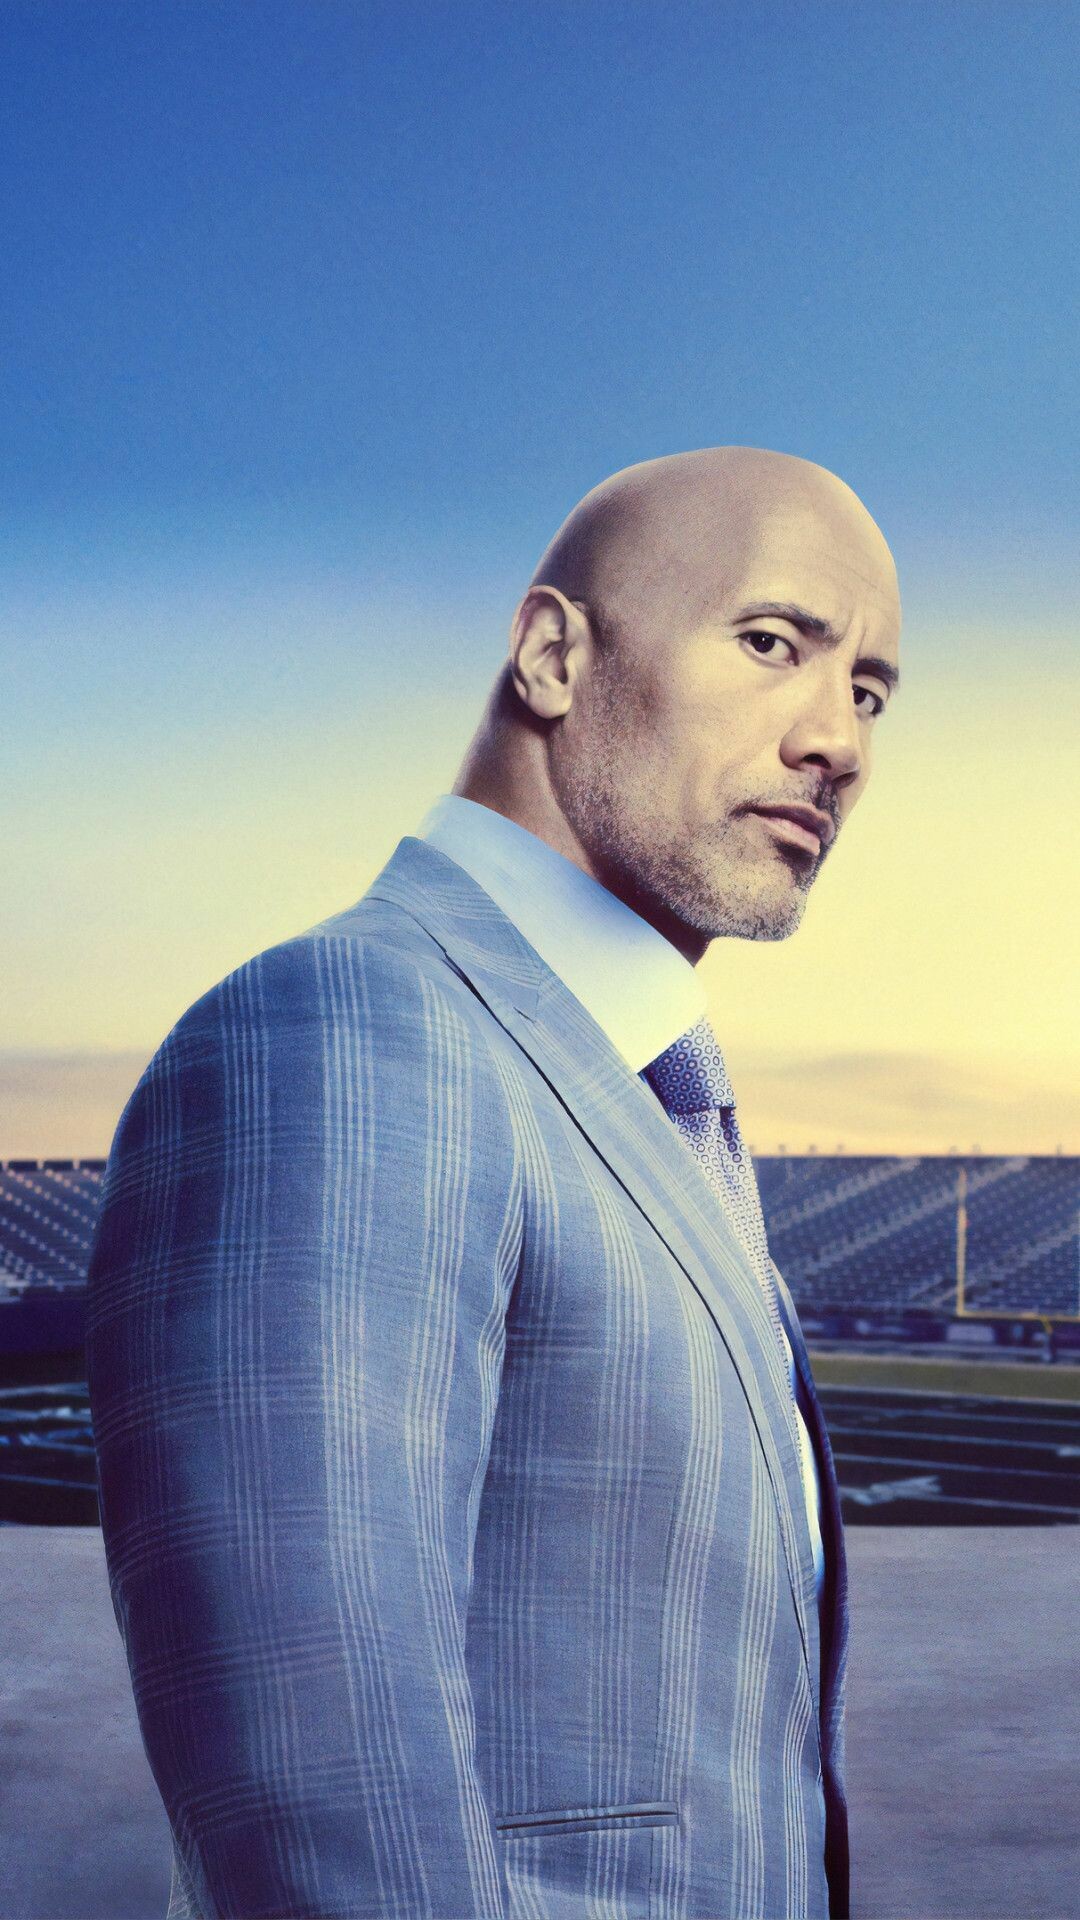 Dwayne Johnson: Appeared as Spencer Strasmore in Ballers TV Series, Hollywood actor. 1080x1920 Full HD Wallpaper.